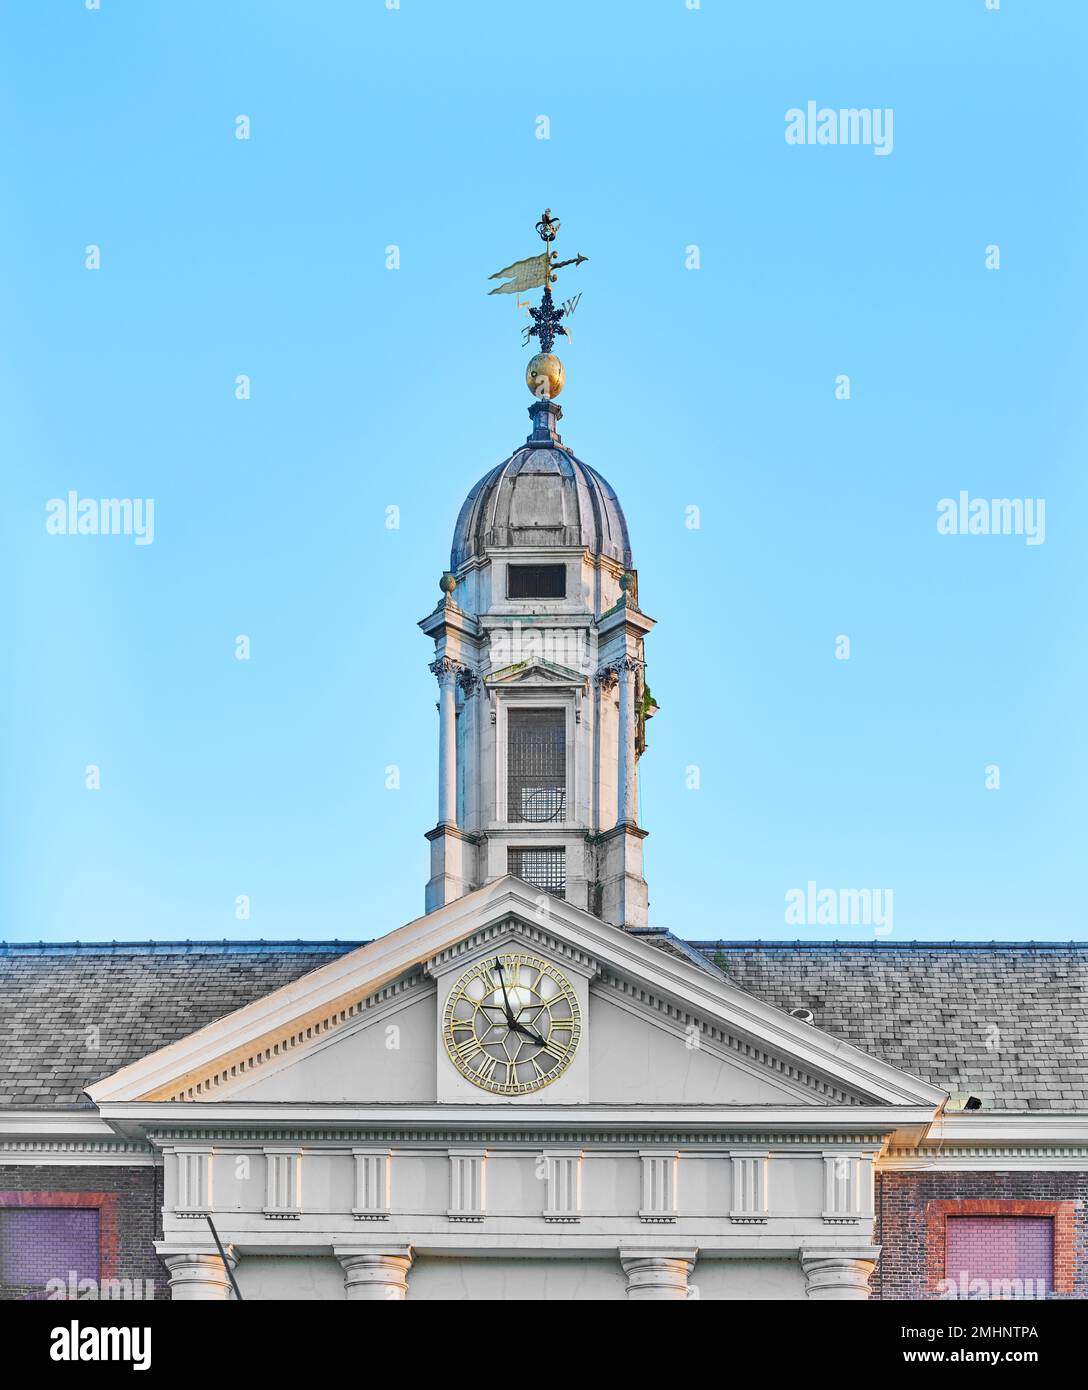 Clock and tower above the main entrance to Royal Chelsea Hospital, London, England, founded by king Charles II for retired military. Stock Photo